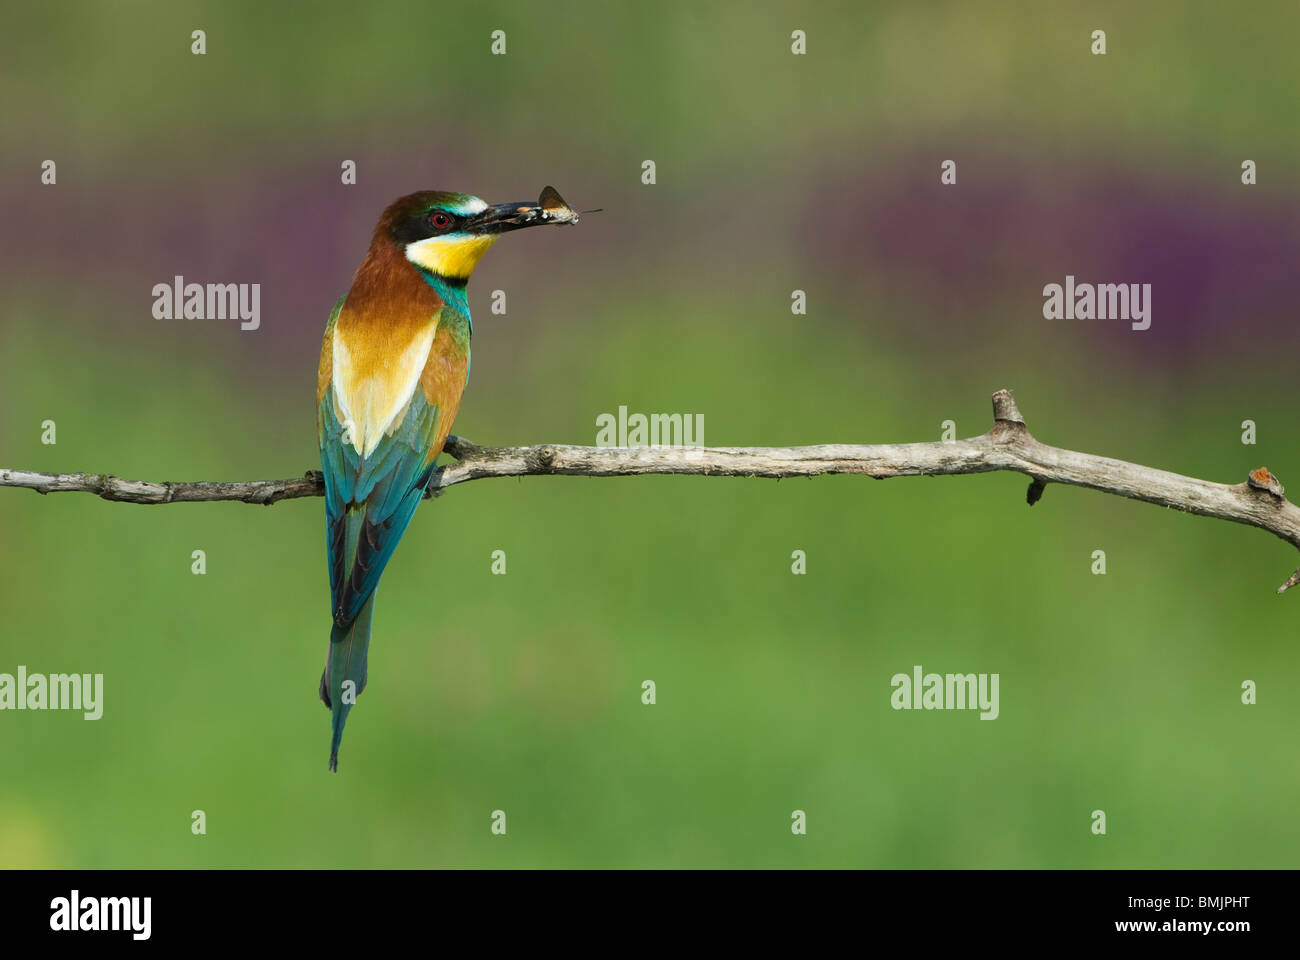 Europe, Hungary, F?geludden, View of European bee eater holding insect in mouth Stock Photo